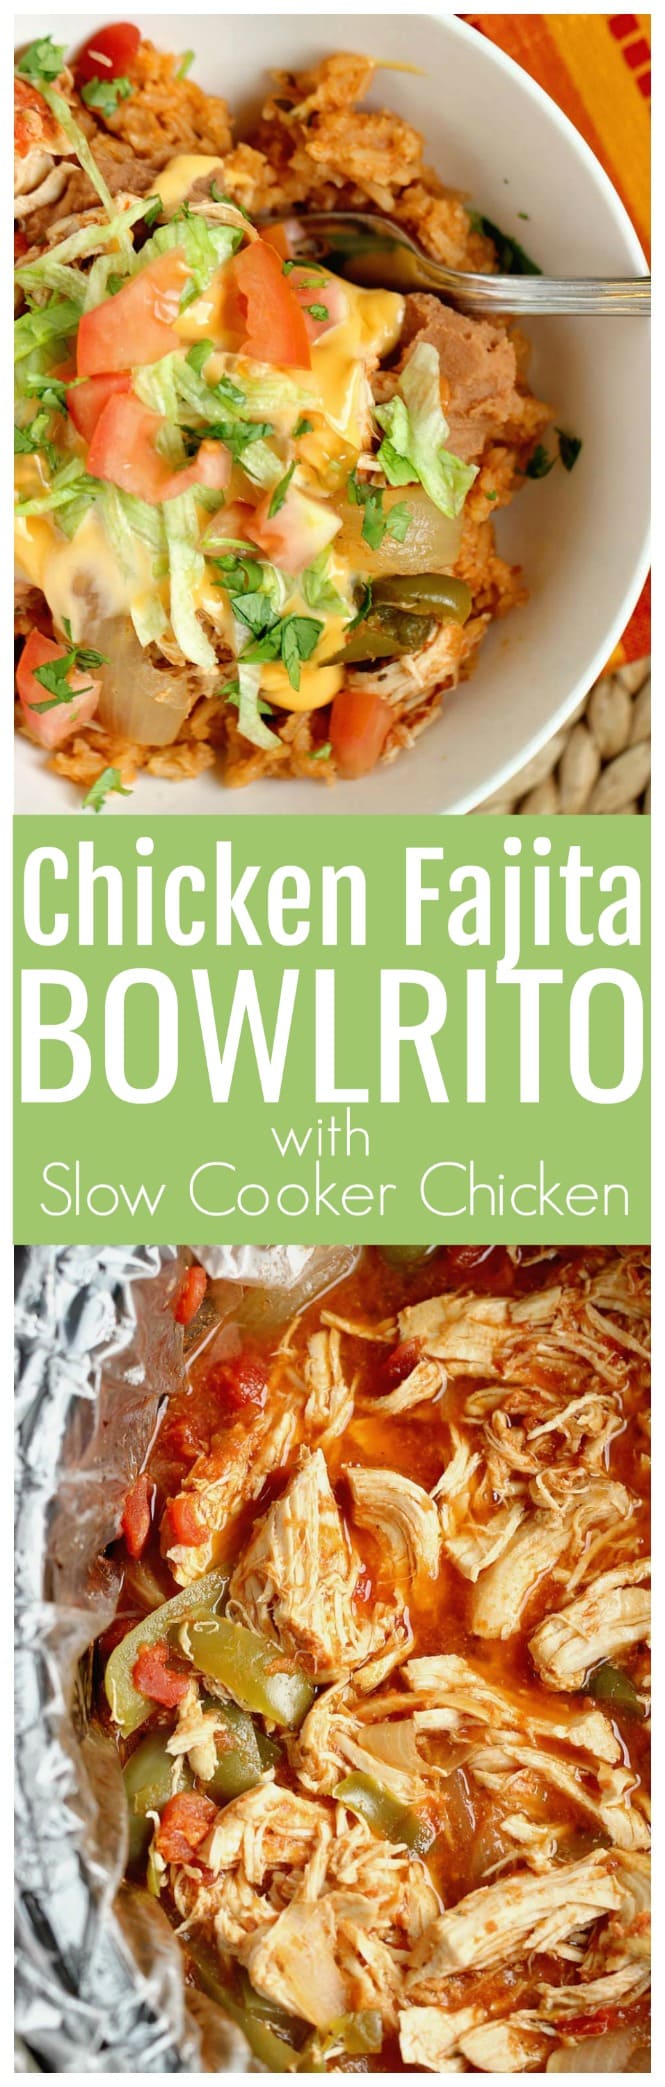 Chicken Fajita Bowlrito - All the great taste of chicken fajitas minus the tortilla made easy with the help of slow cooker mexican chicken!!